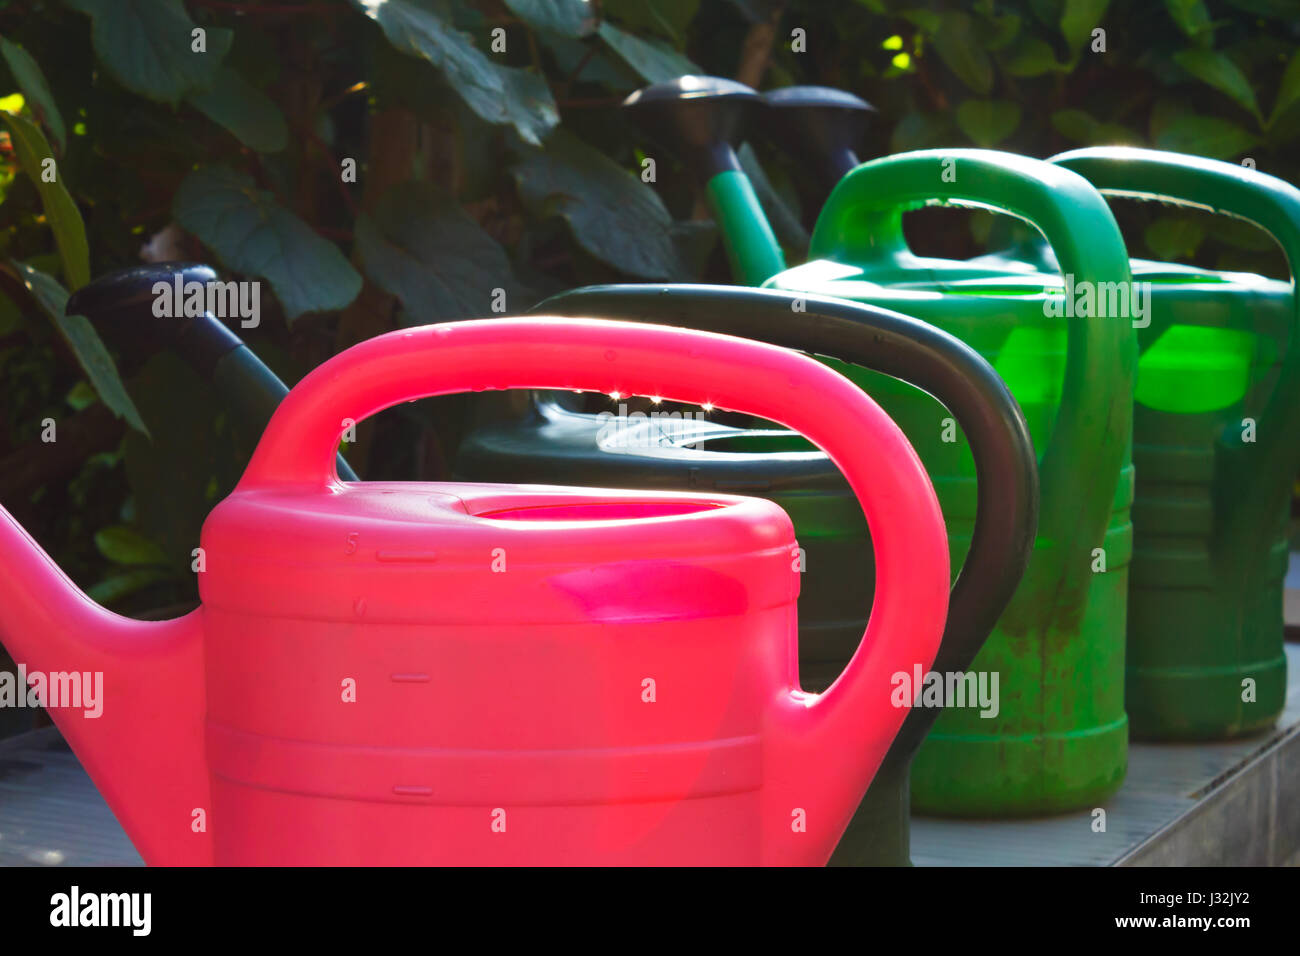 Four empty watering cans or pots in red and green waiting in the sun to be used, dark  background, symbol for garden work in summer Stock Photo